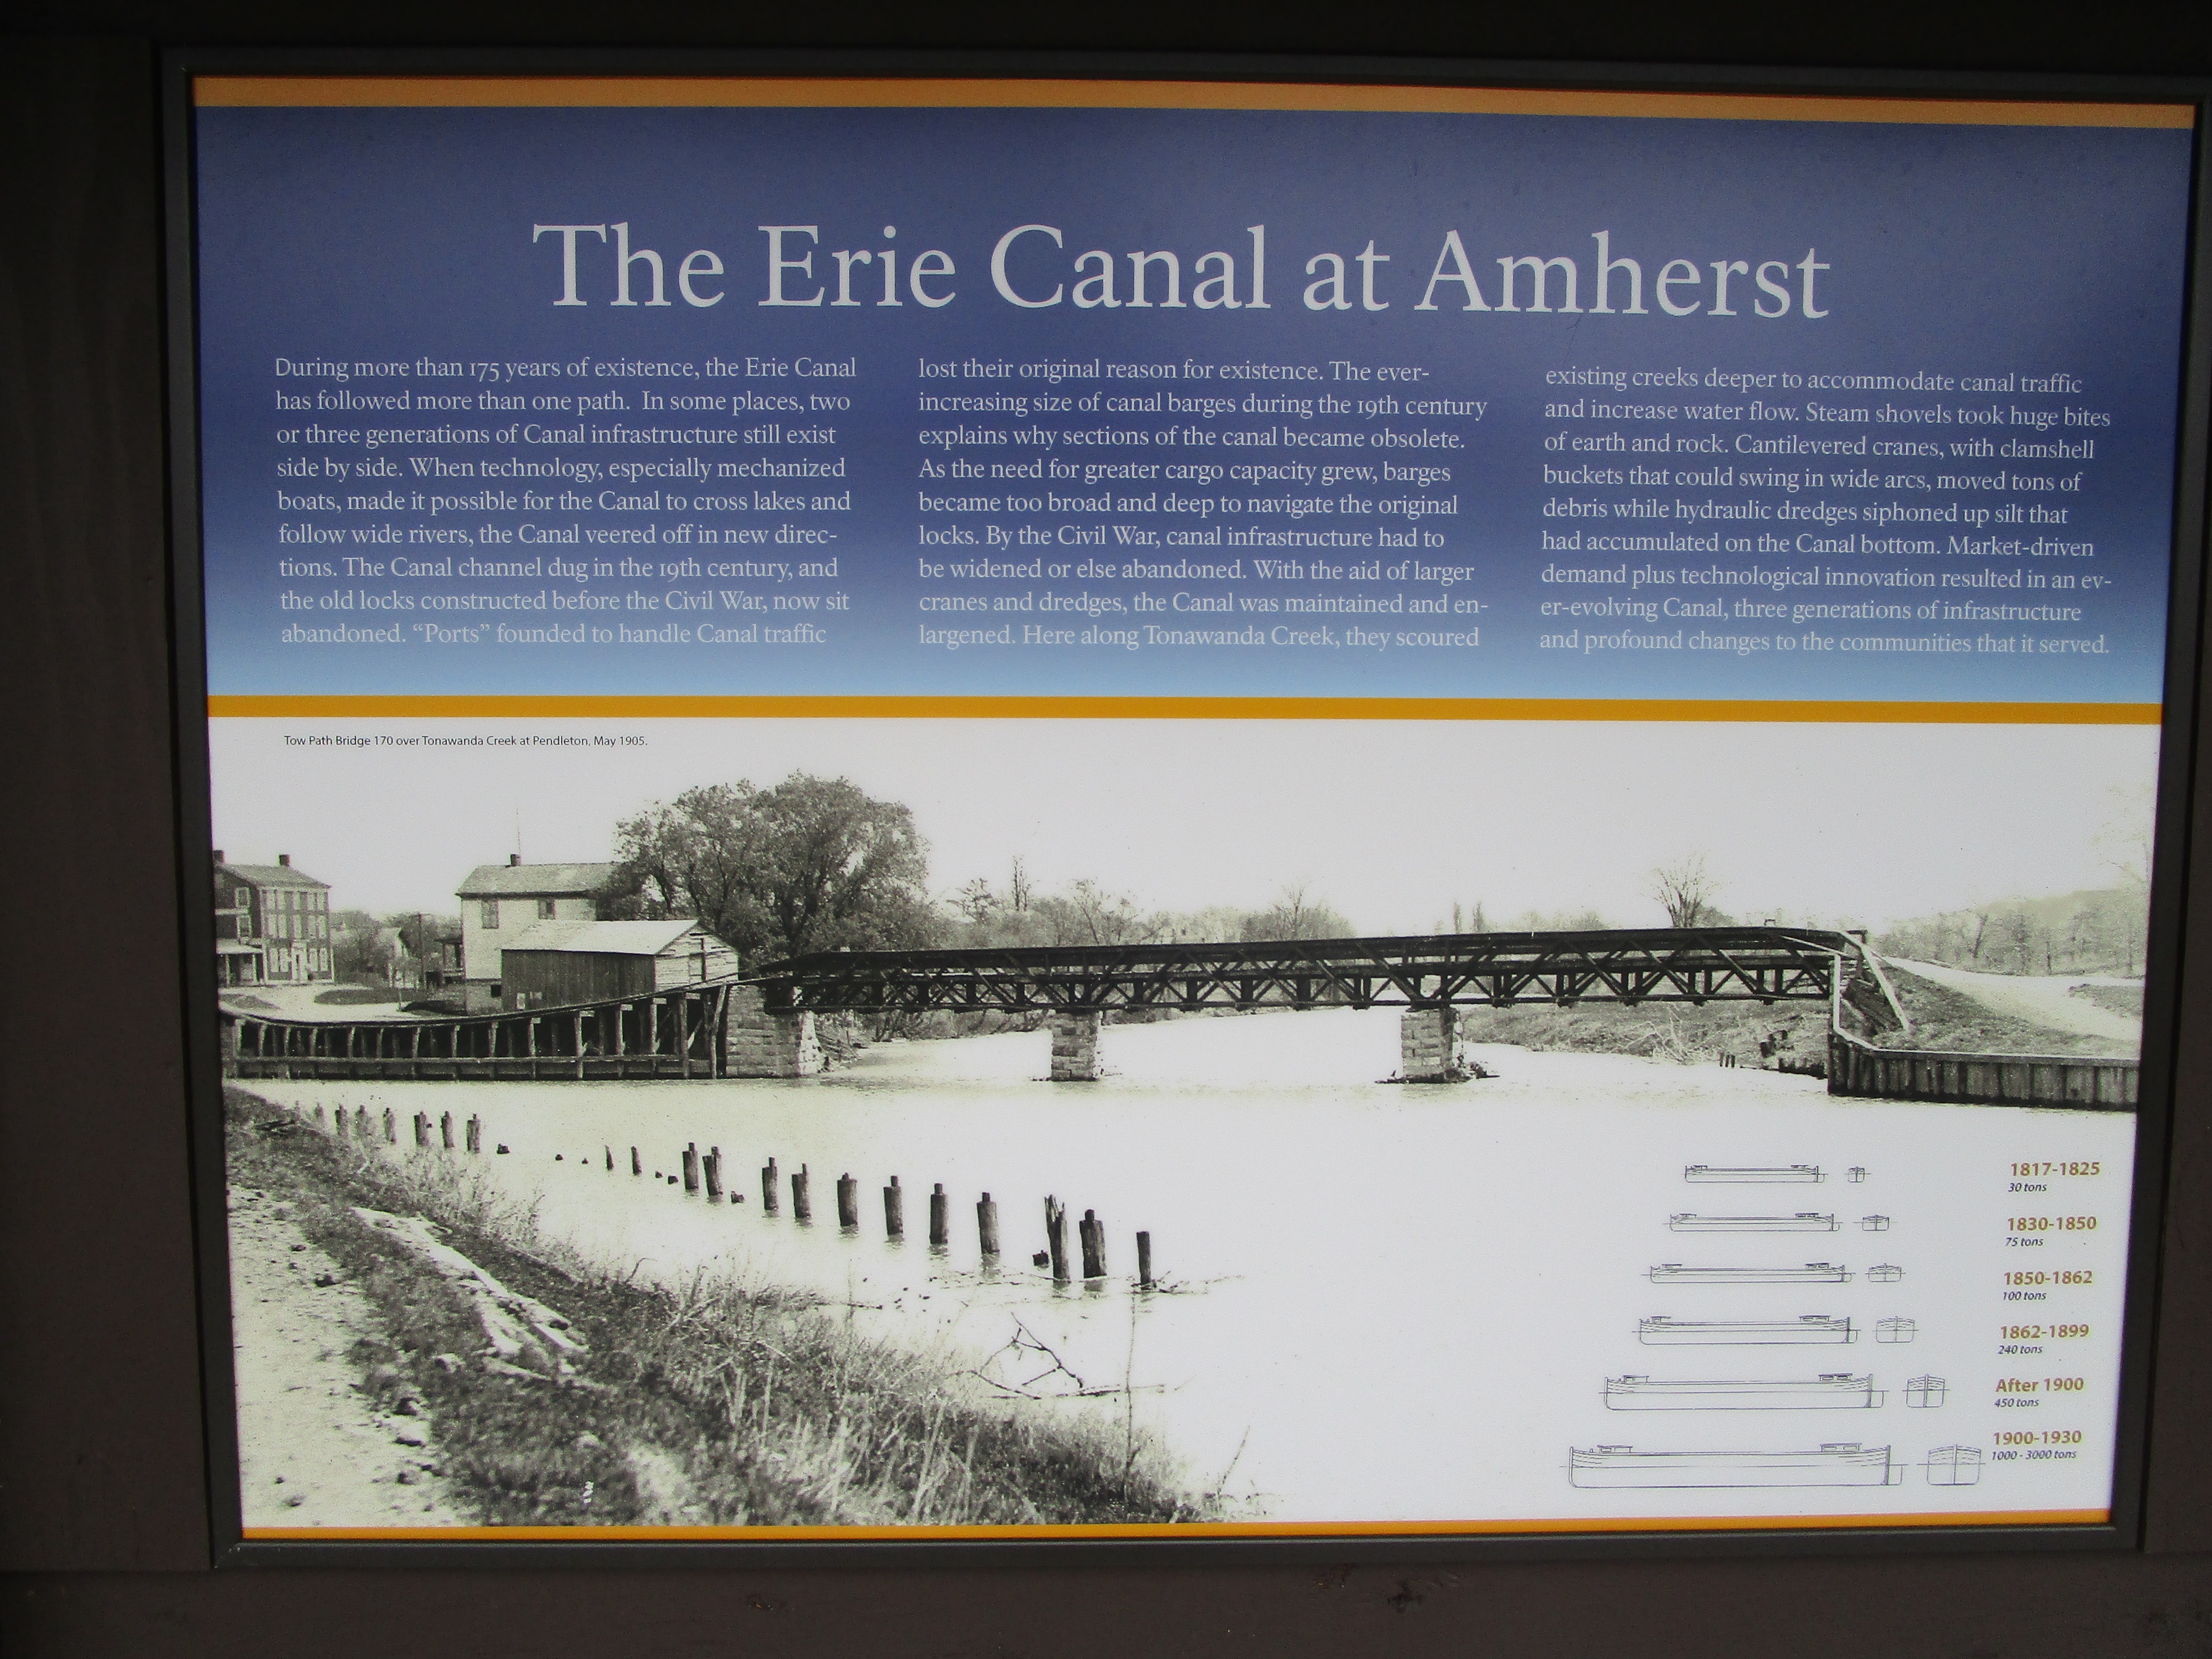 The Erie Canal at Amherst Marker